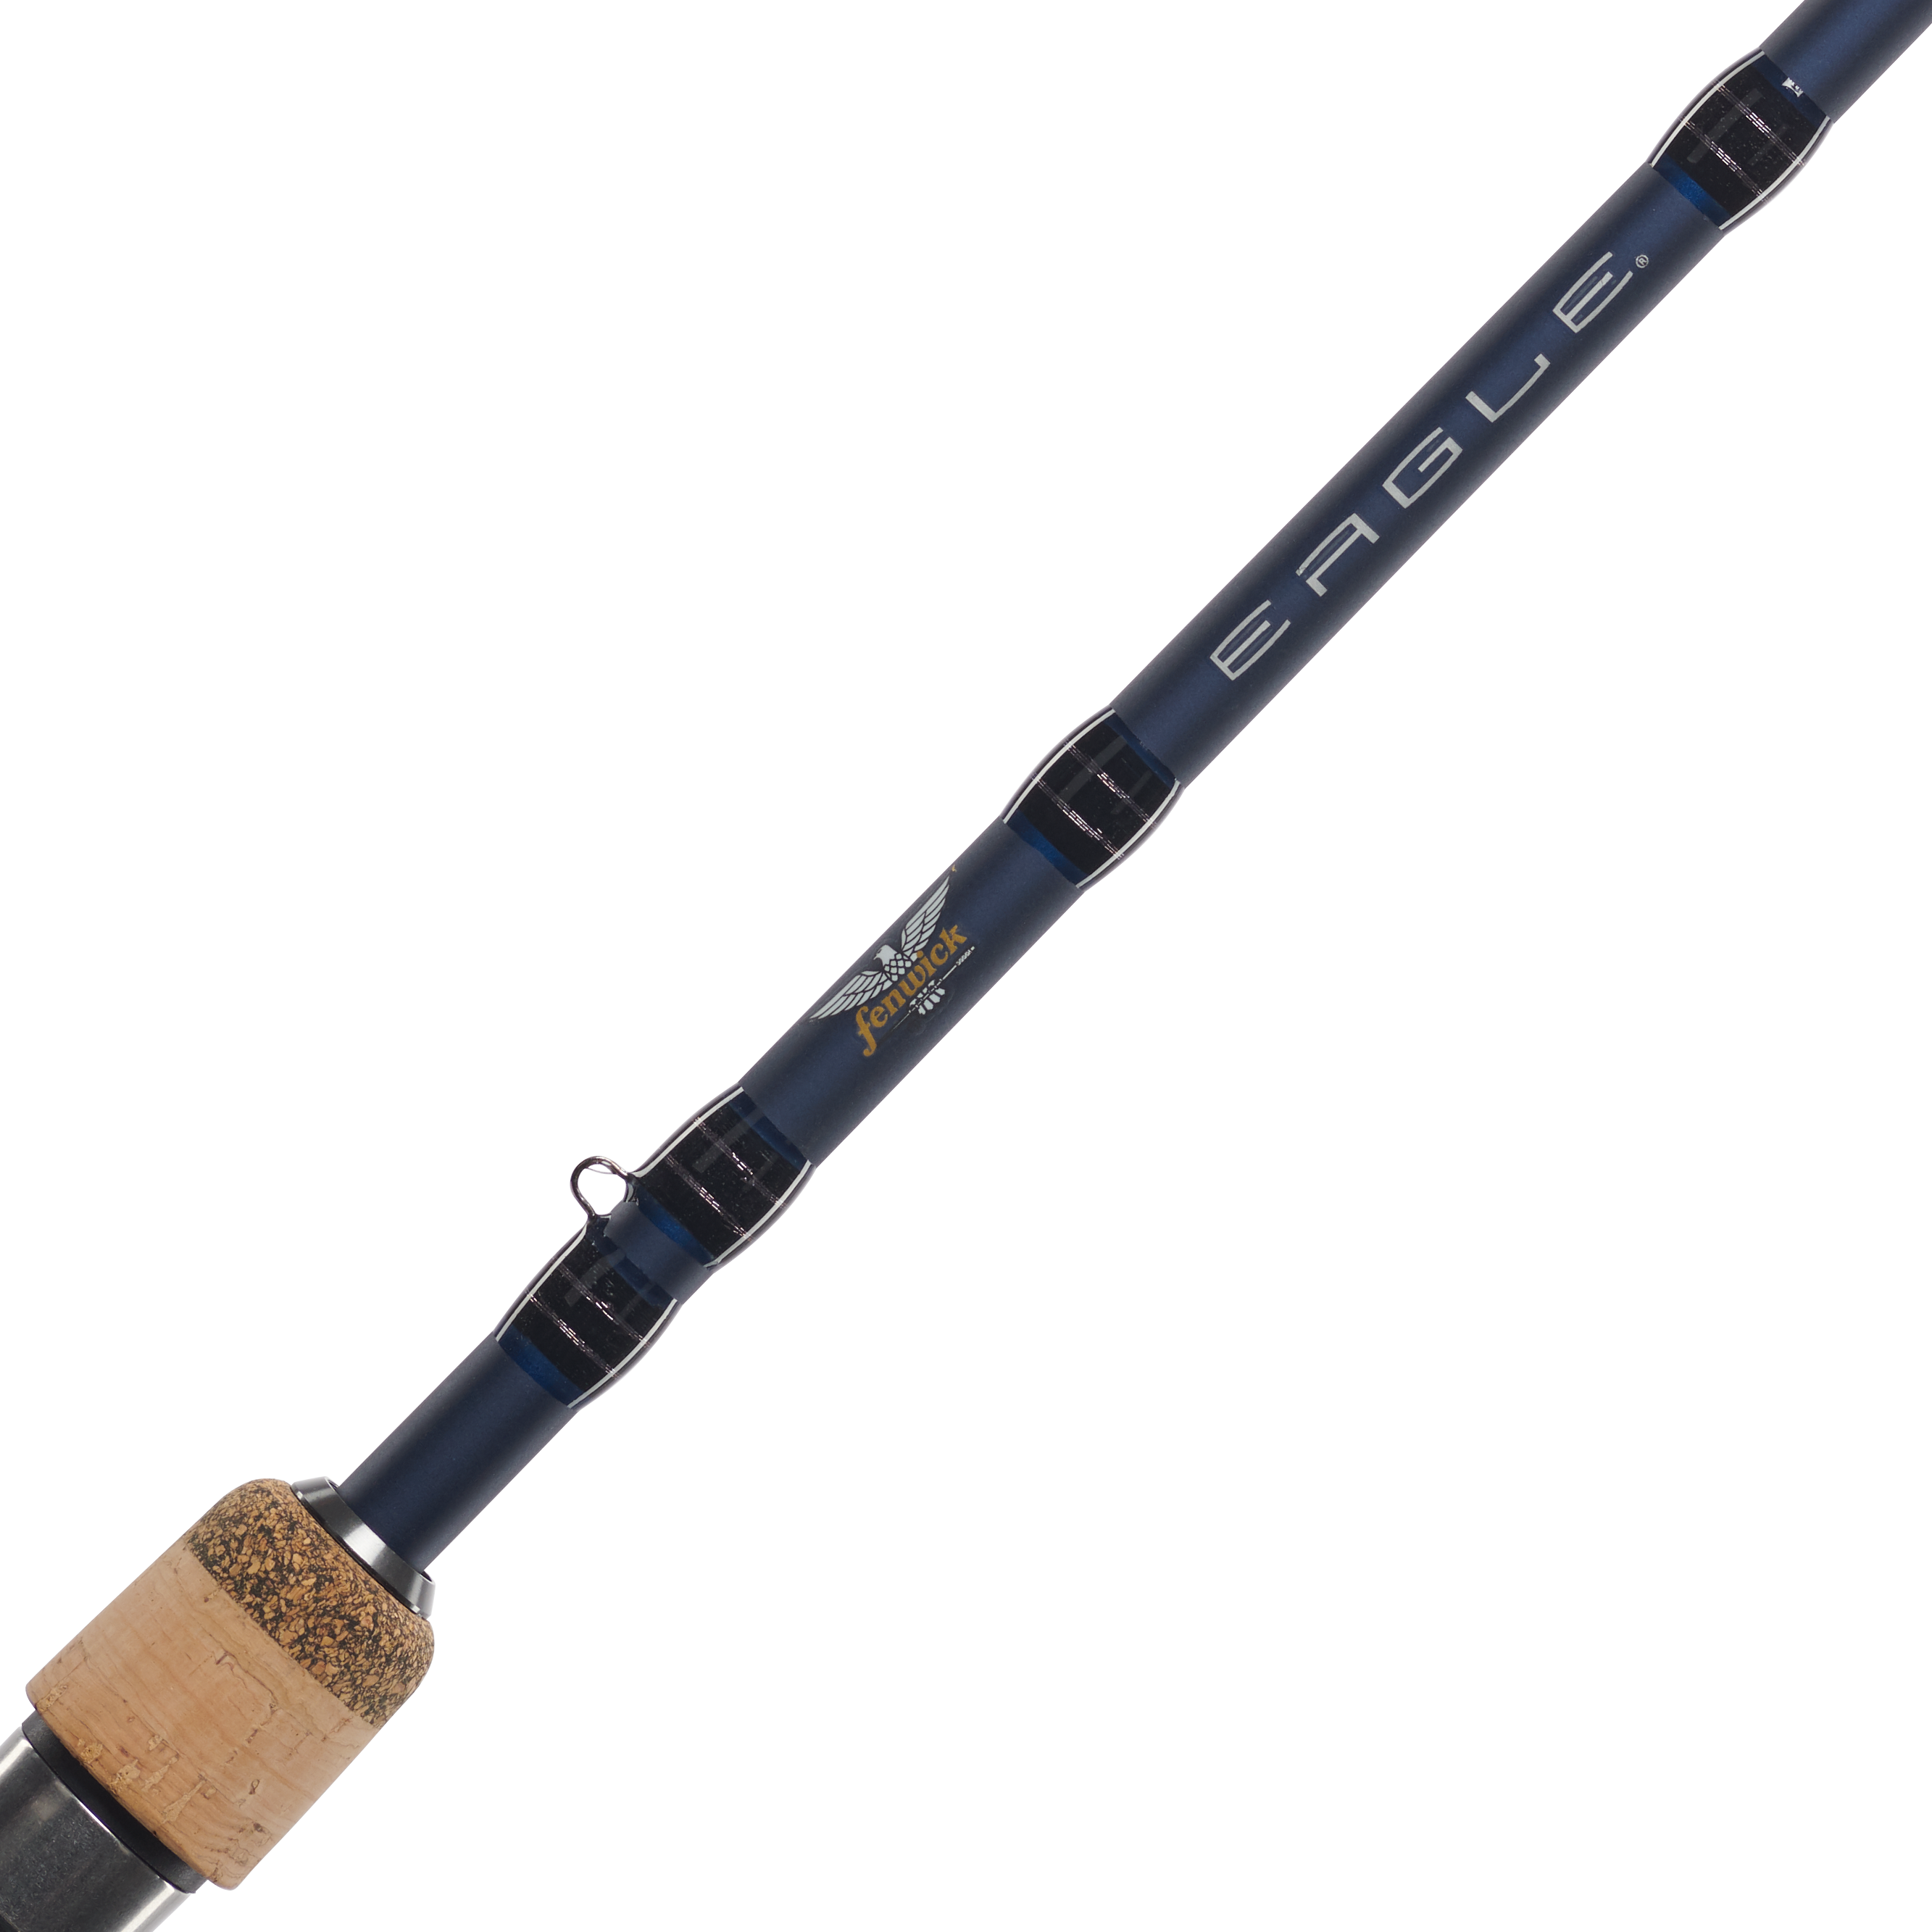 https://op2.0ps.us/original/opplanet-pflueger-president-eagle-combo-5-2-1-right-left-25-5ft-6in-rod-length-ultra-light-power-moderate-action-2-pieces-rod-pressp25eag56ul2cbo-main